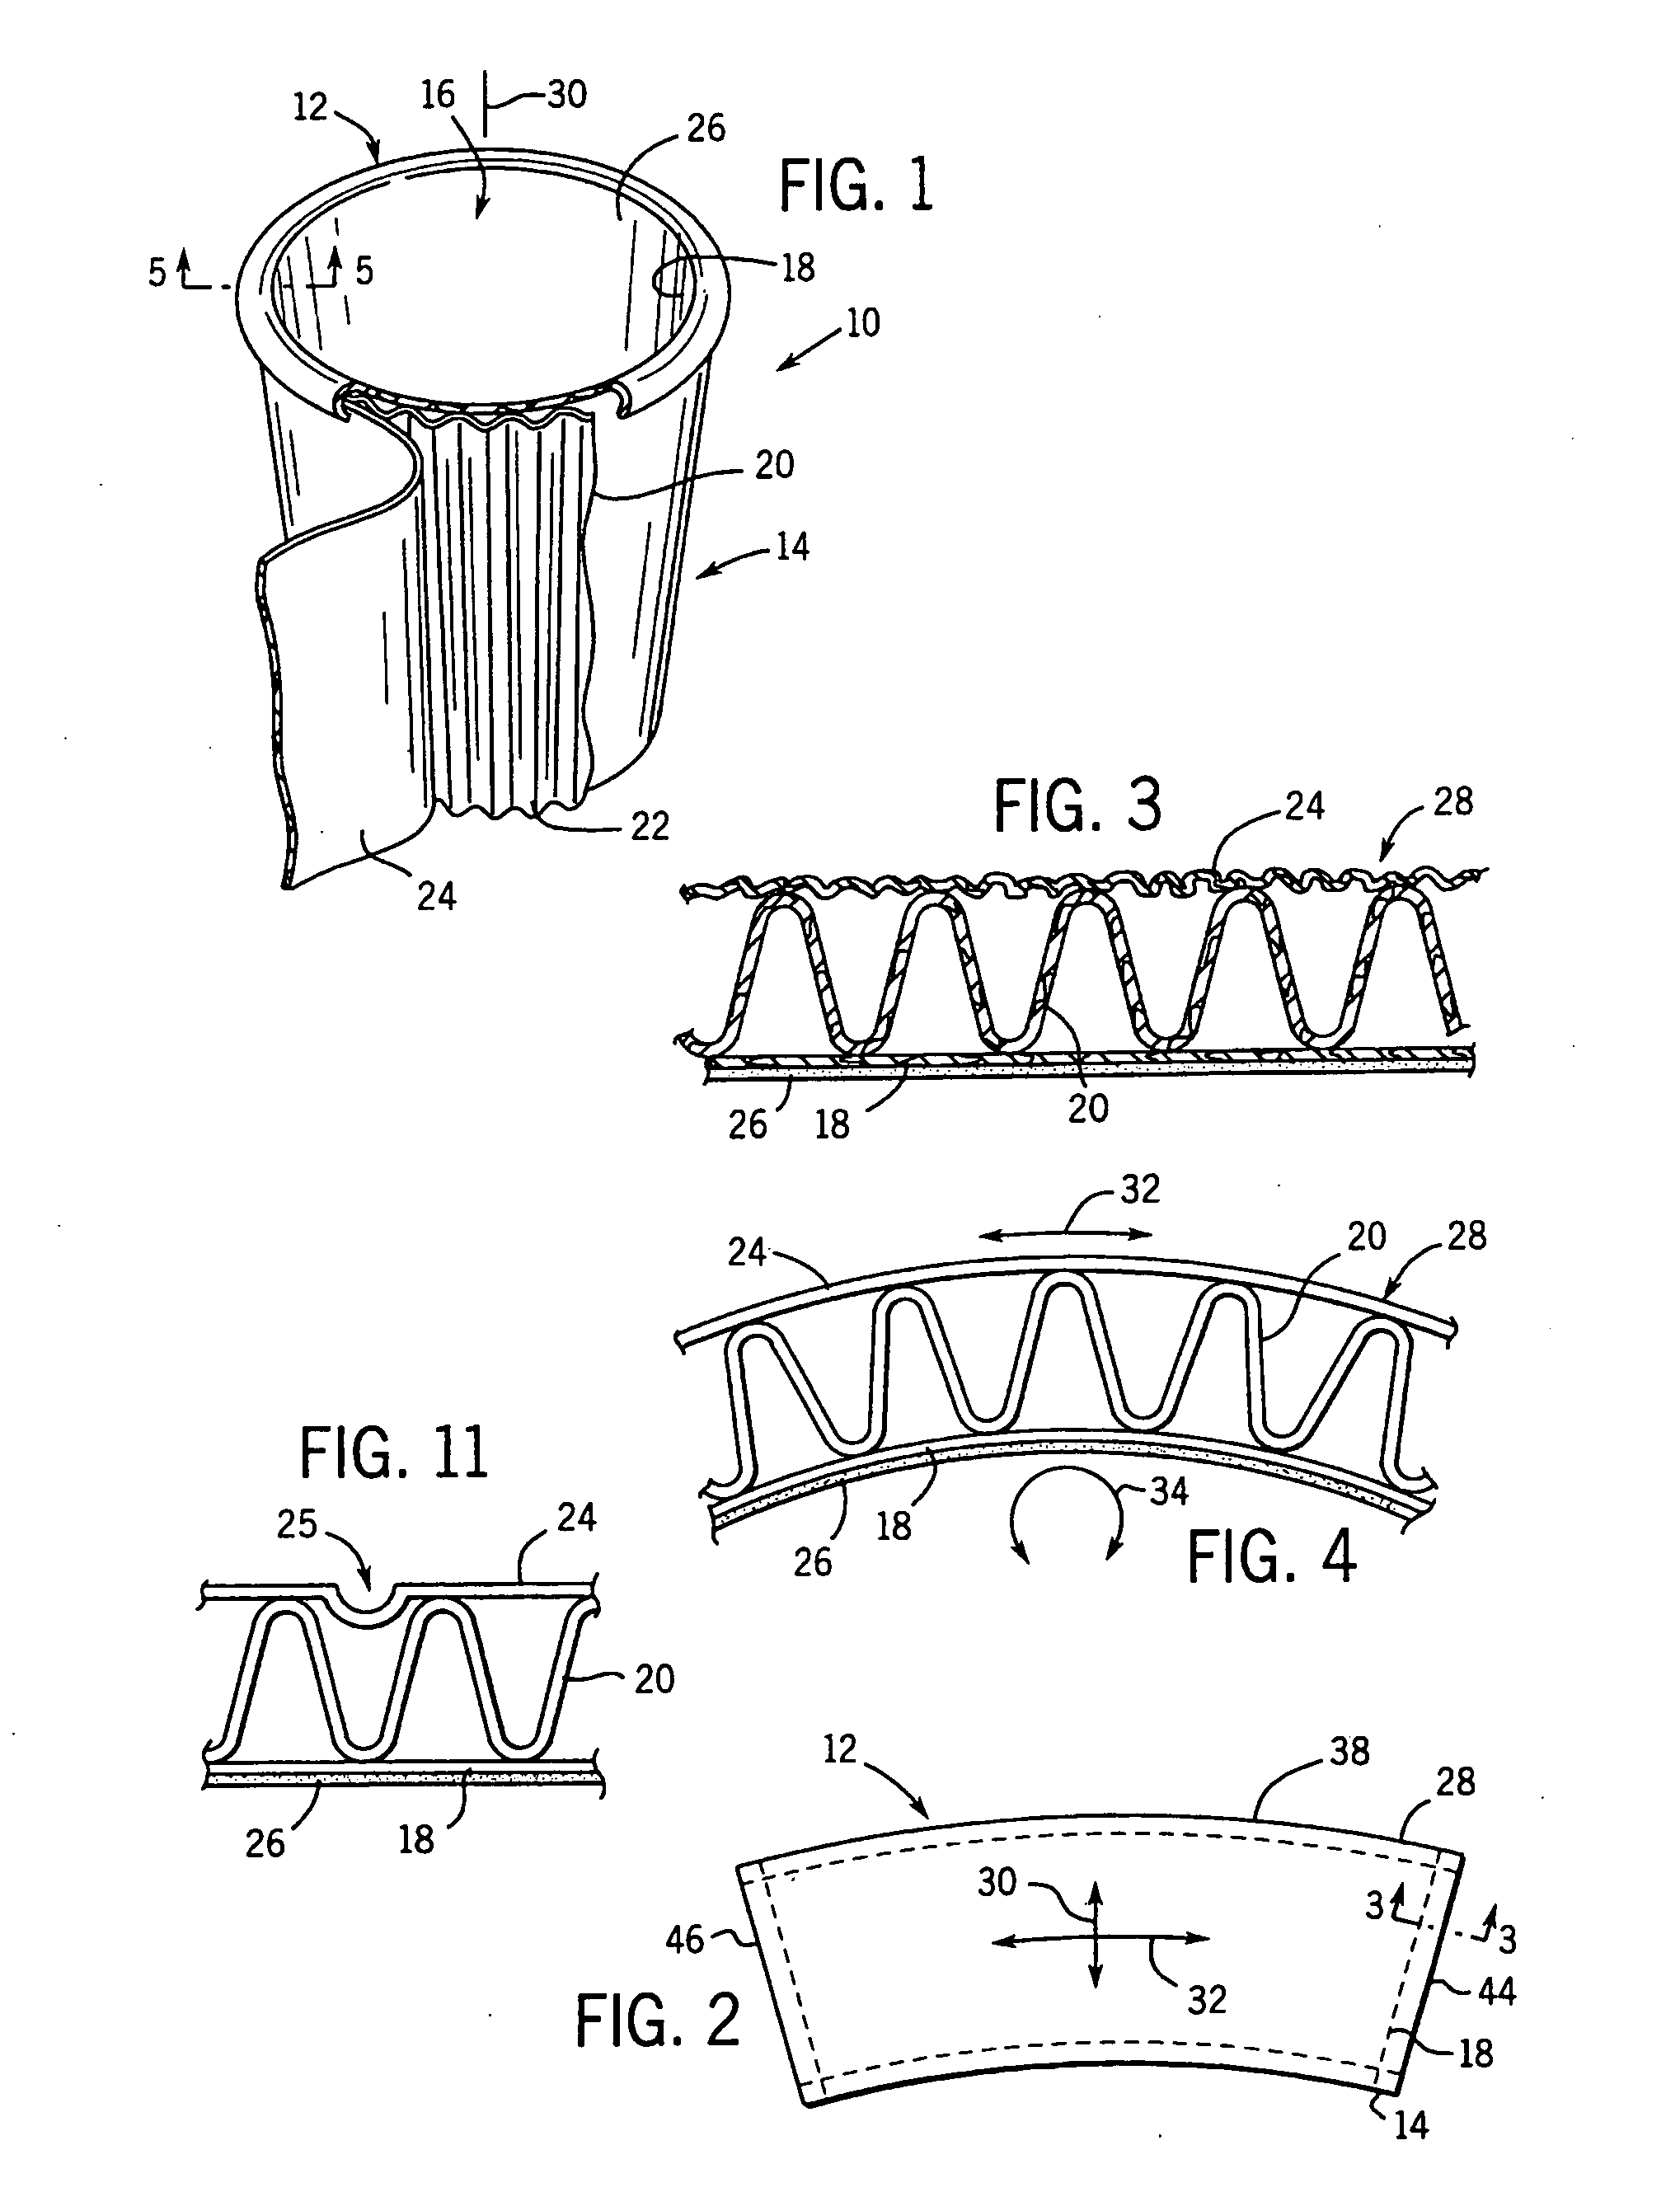 Method for forming a container with corrugated wall and rolled lip